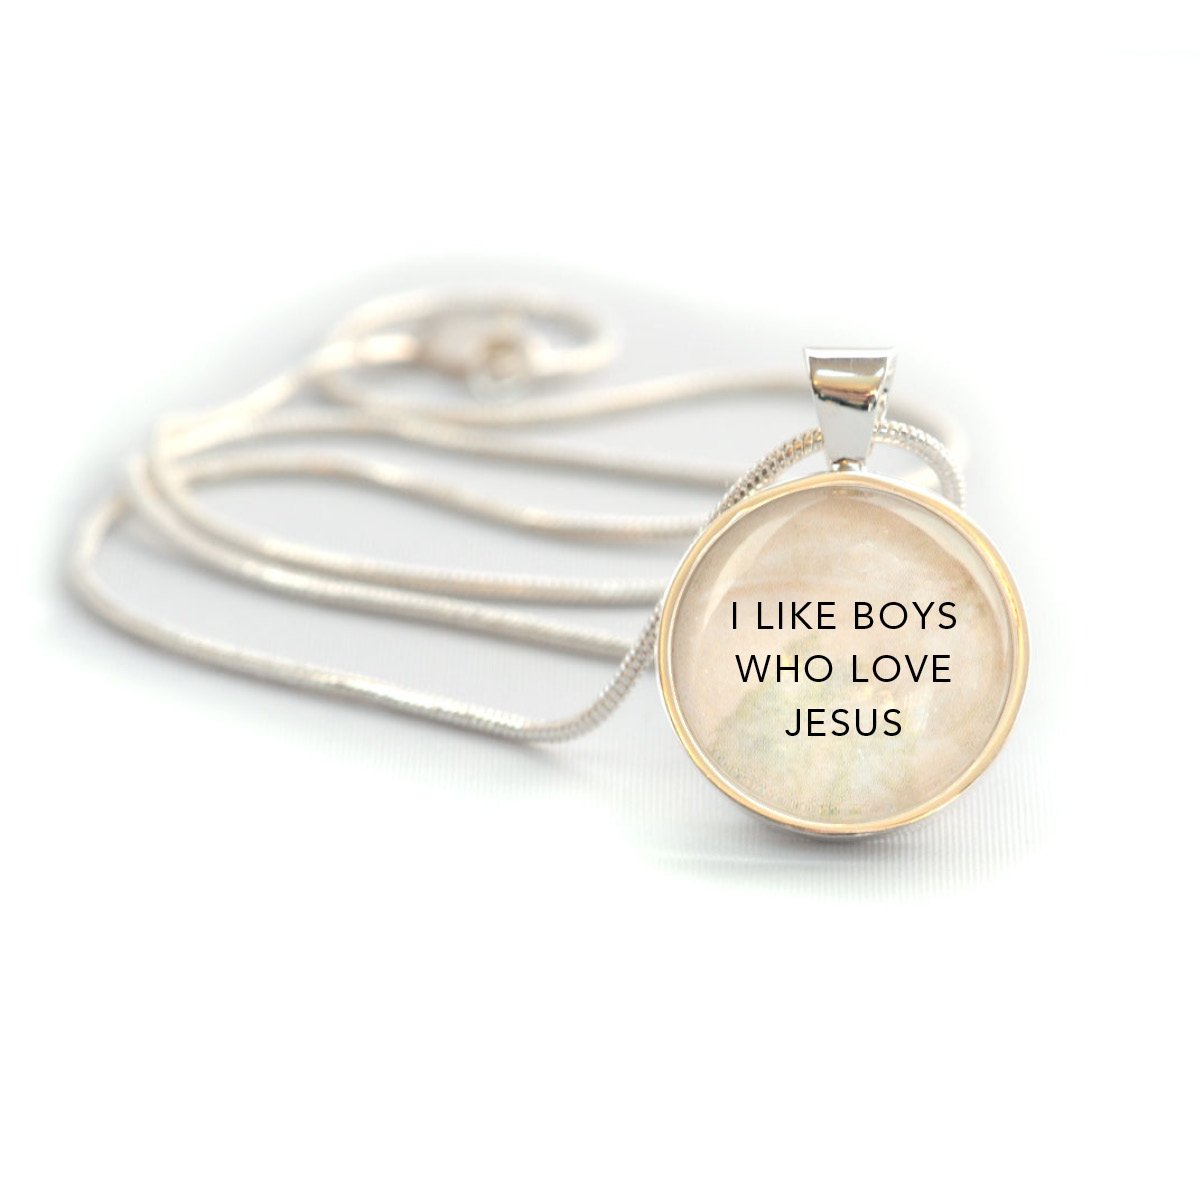 I Like Boys Who Love Jesus Silver-Plated Pendant Necklace for Christian Girls - Necklaces - Bijou Her -  -  - 